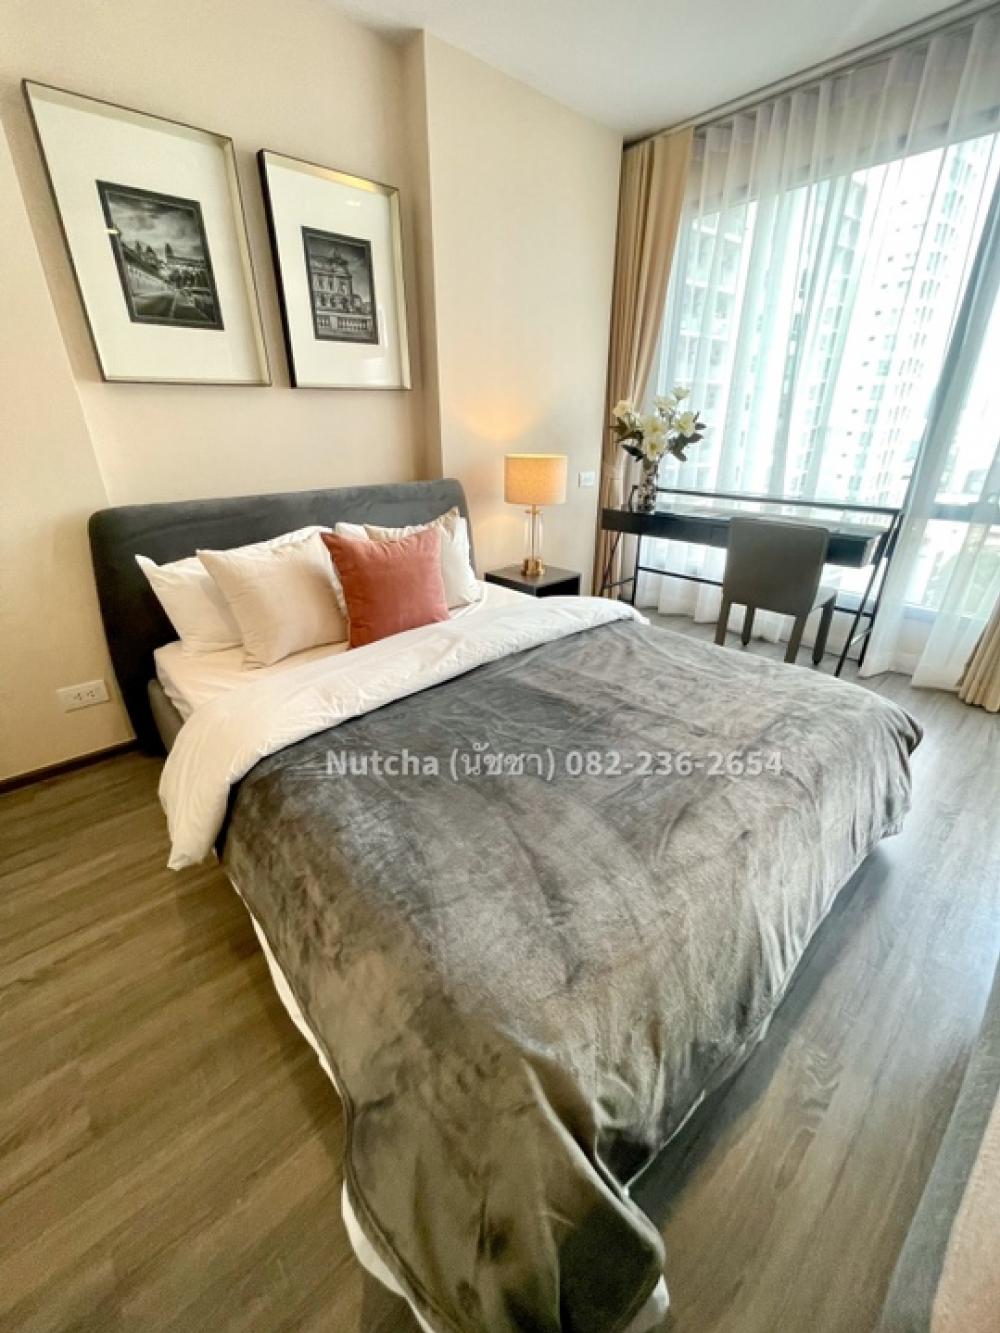 For SaleCondoRatchathewi,Phayathai : Urgent!! 🧳 Fully furnished room ready to move in 🧳 Ideo Mobi Rangnam 1Bedroom 35sq.m ☎️ Contact project salesman 082-236-2654 Natcha